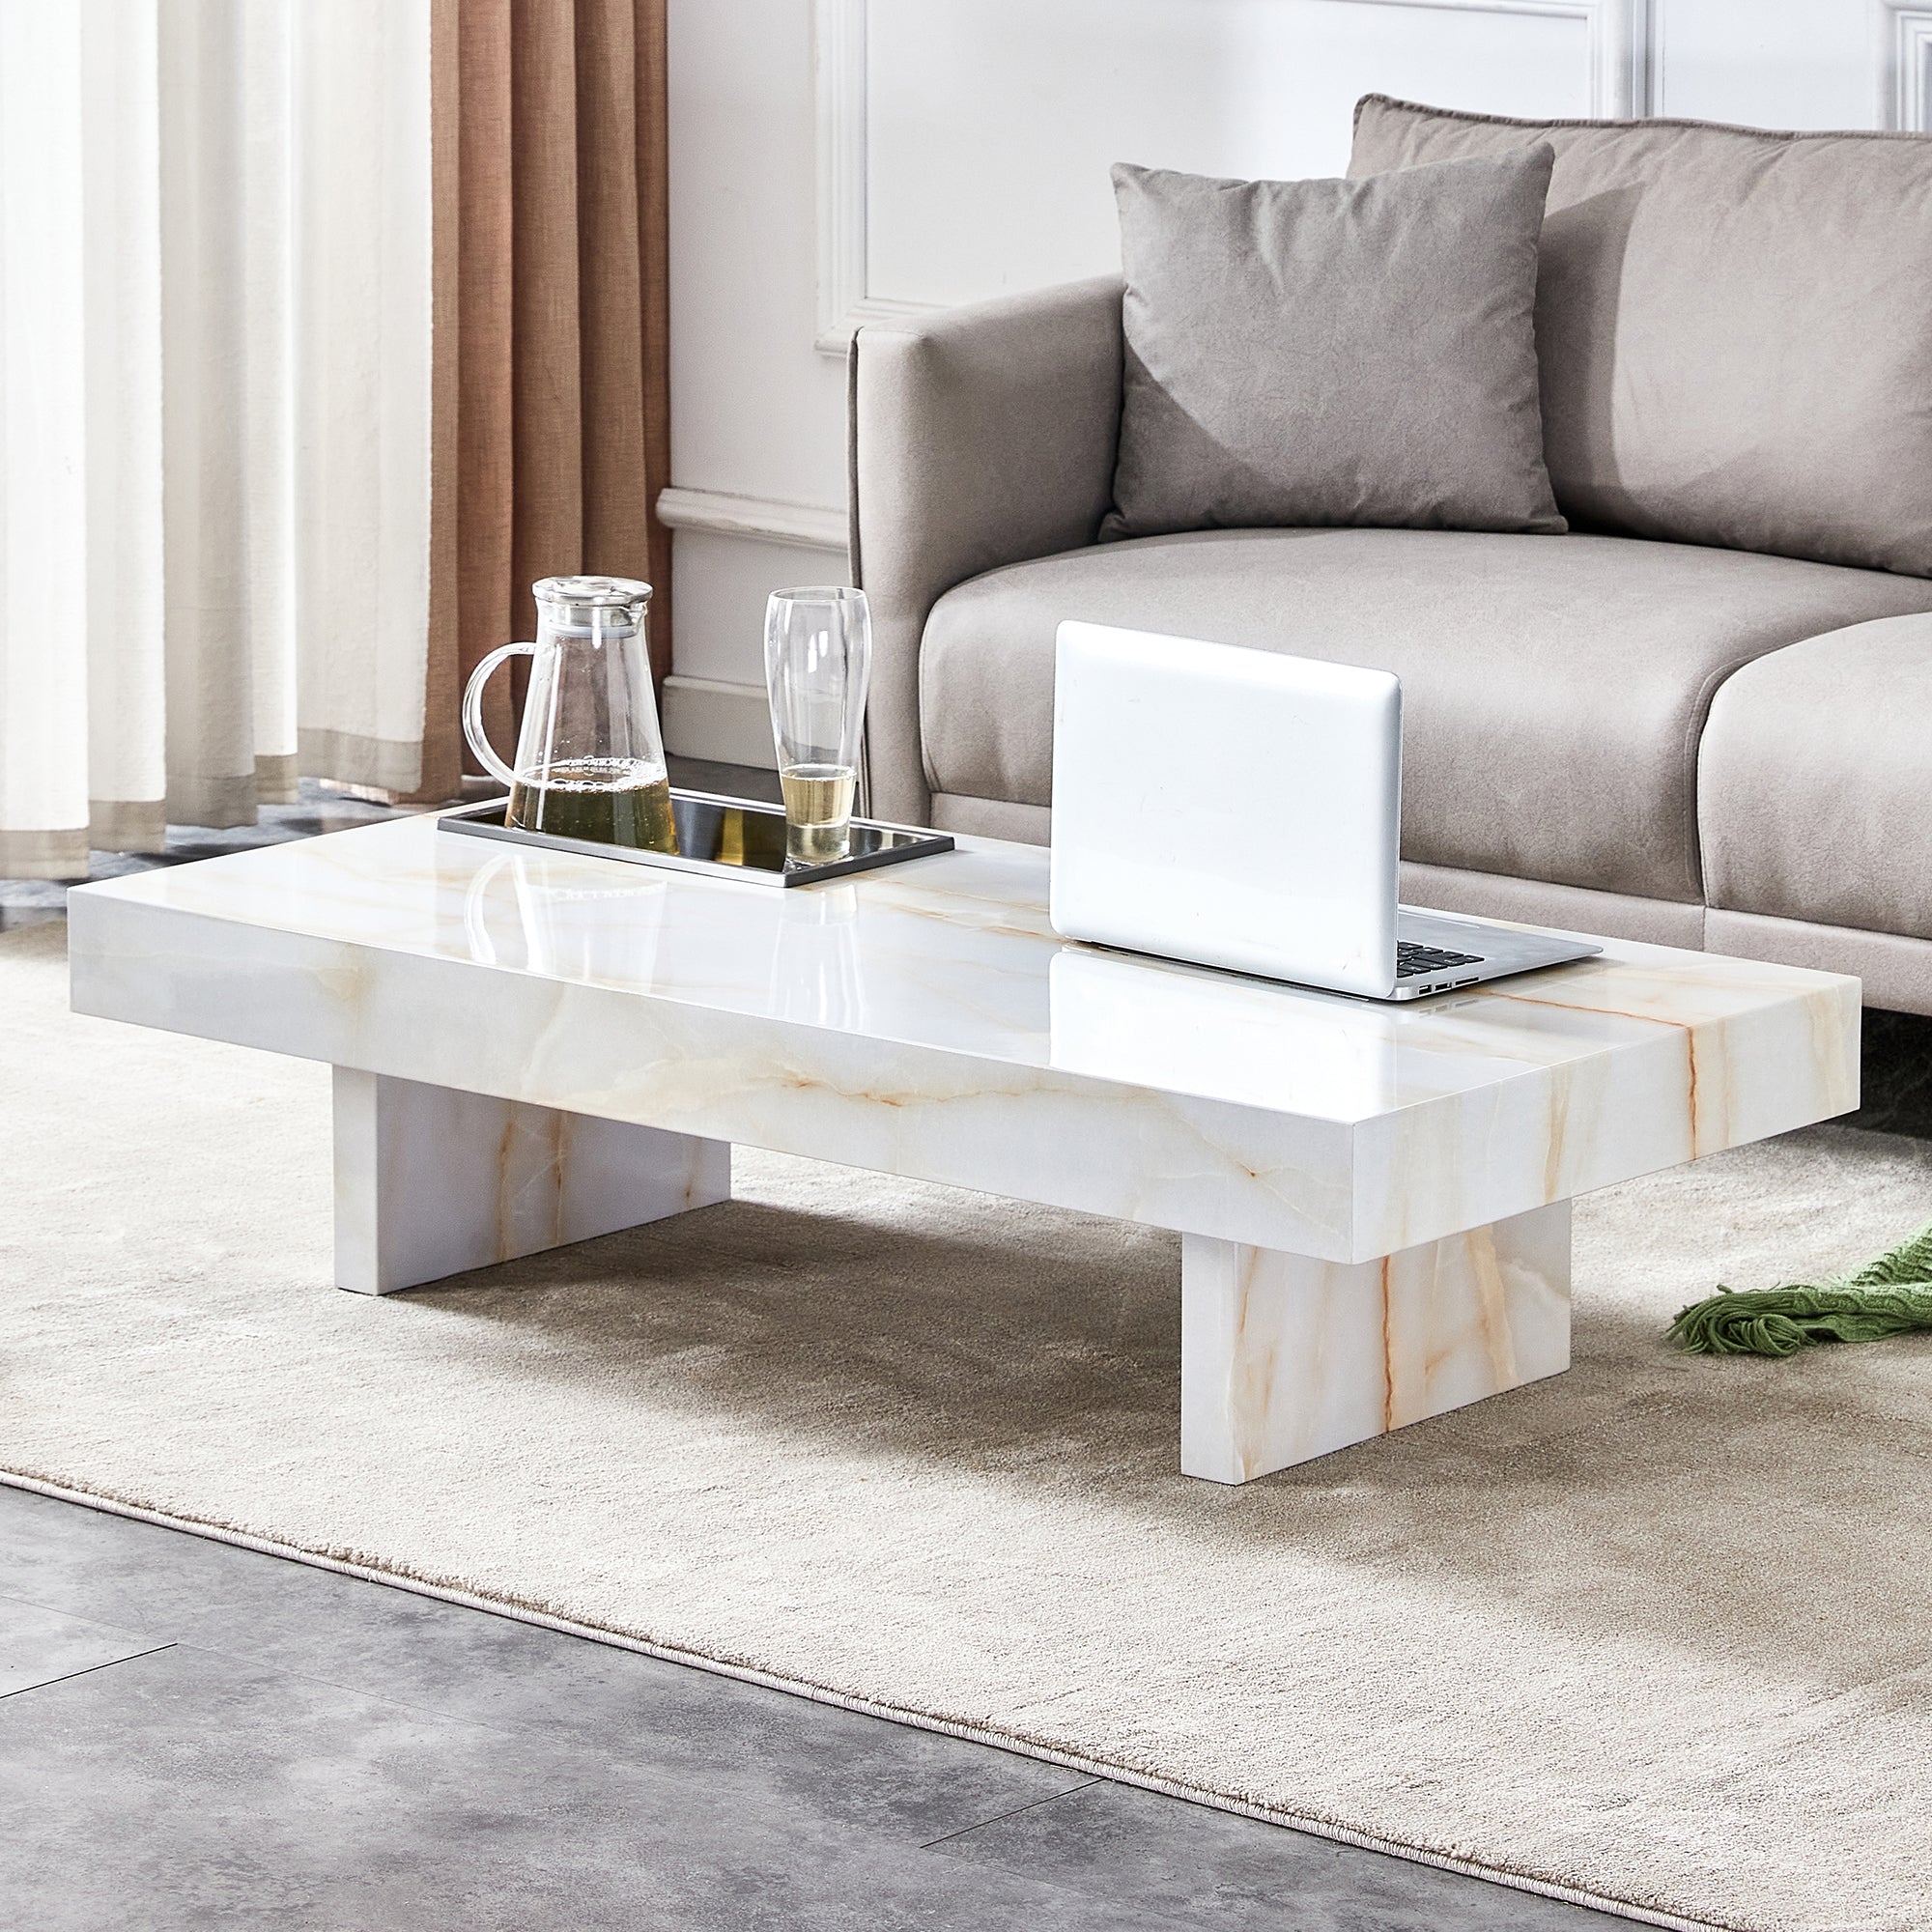 🆓🚛 Modern & Practical Coffee Table With Imitation Marble Patterns, Made of MDF Material 47.2"X 23.6"X 12", White